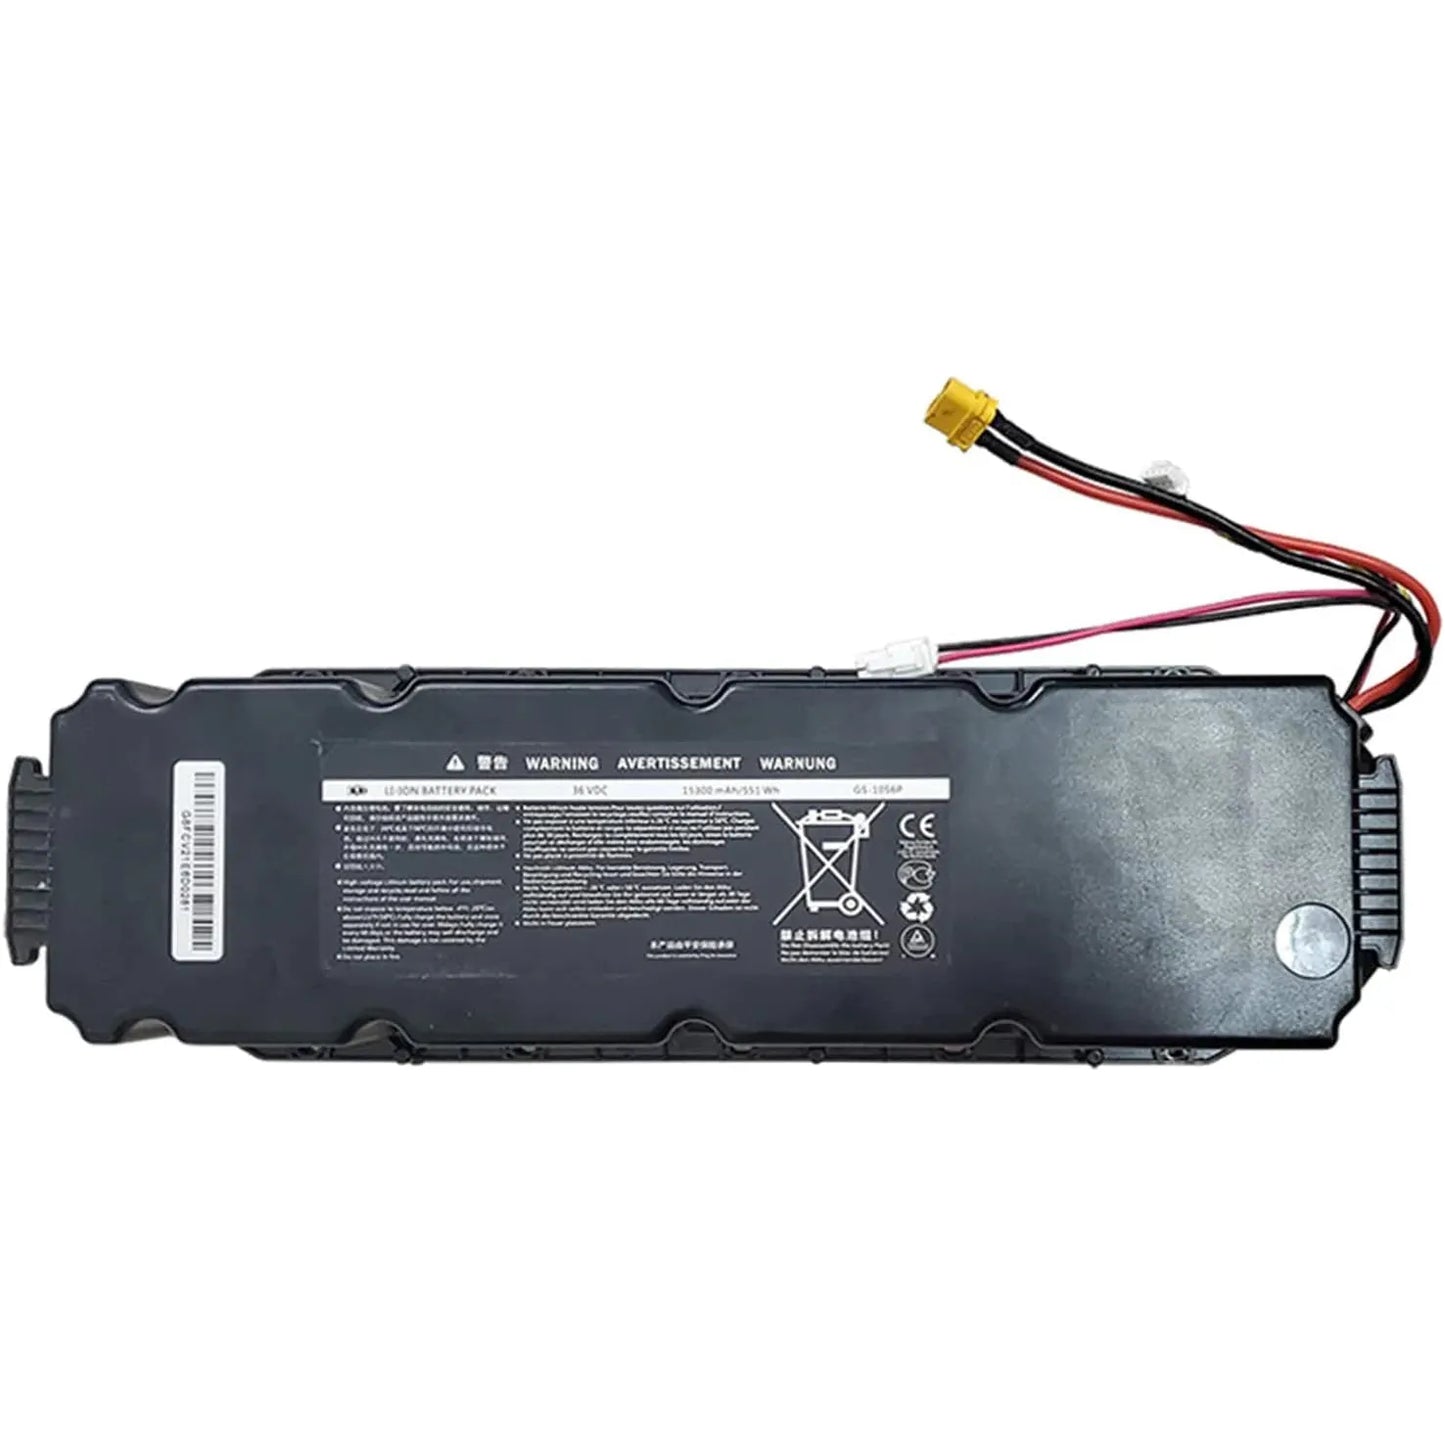 Segway Ninebot Max G30 Replacement Battery - Power in Motion